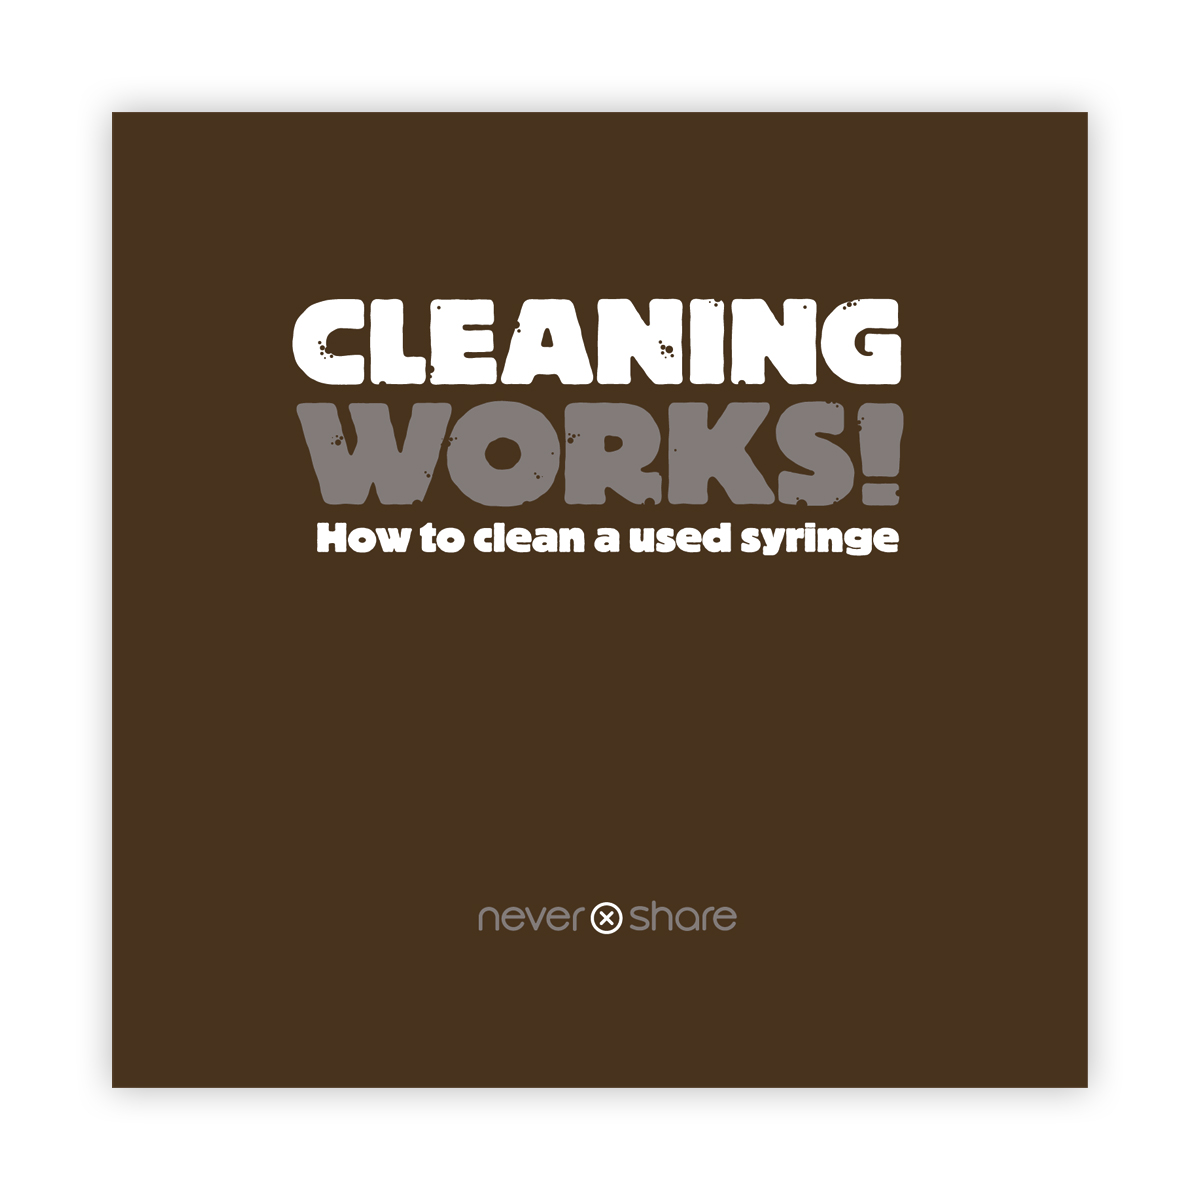 Cleaning works!